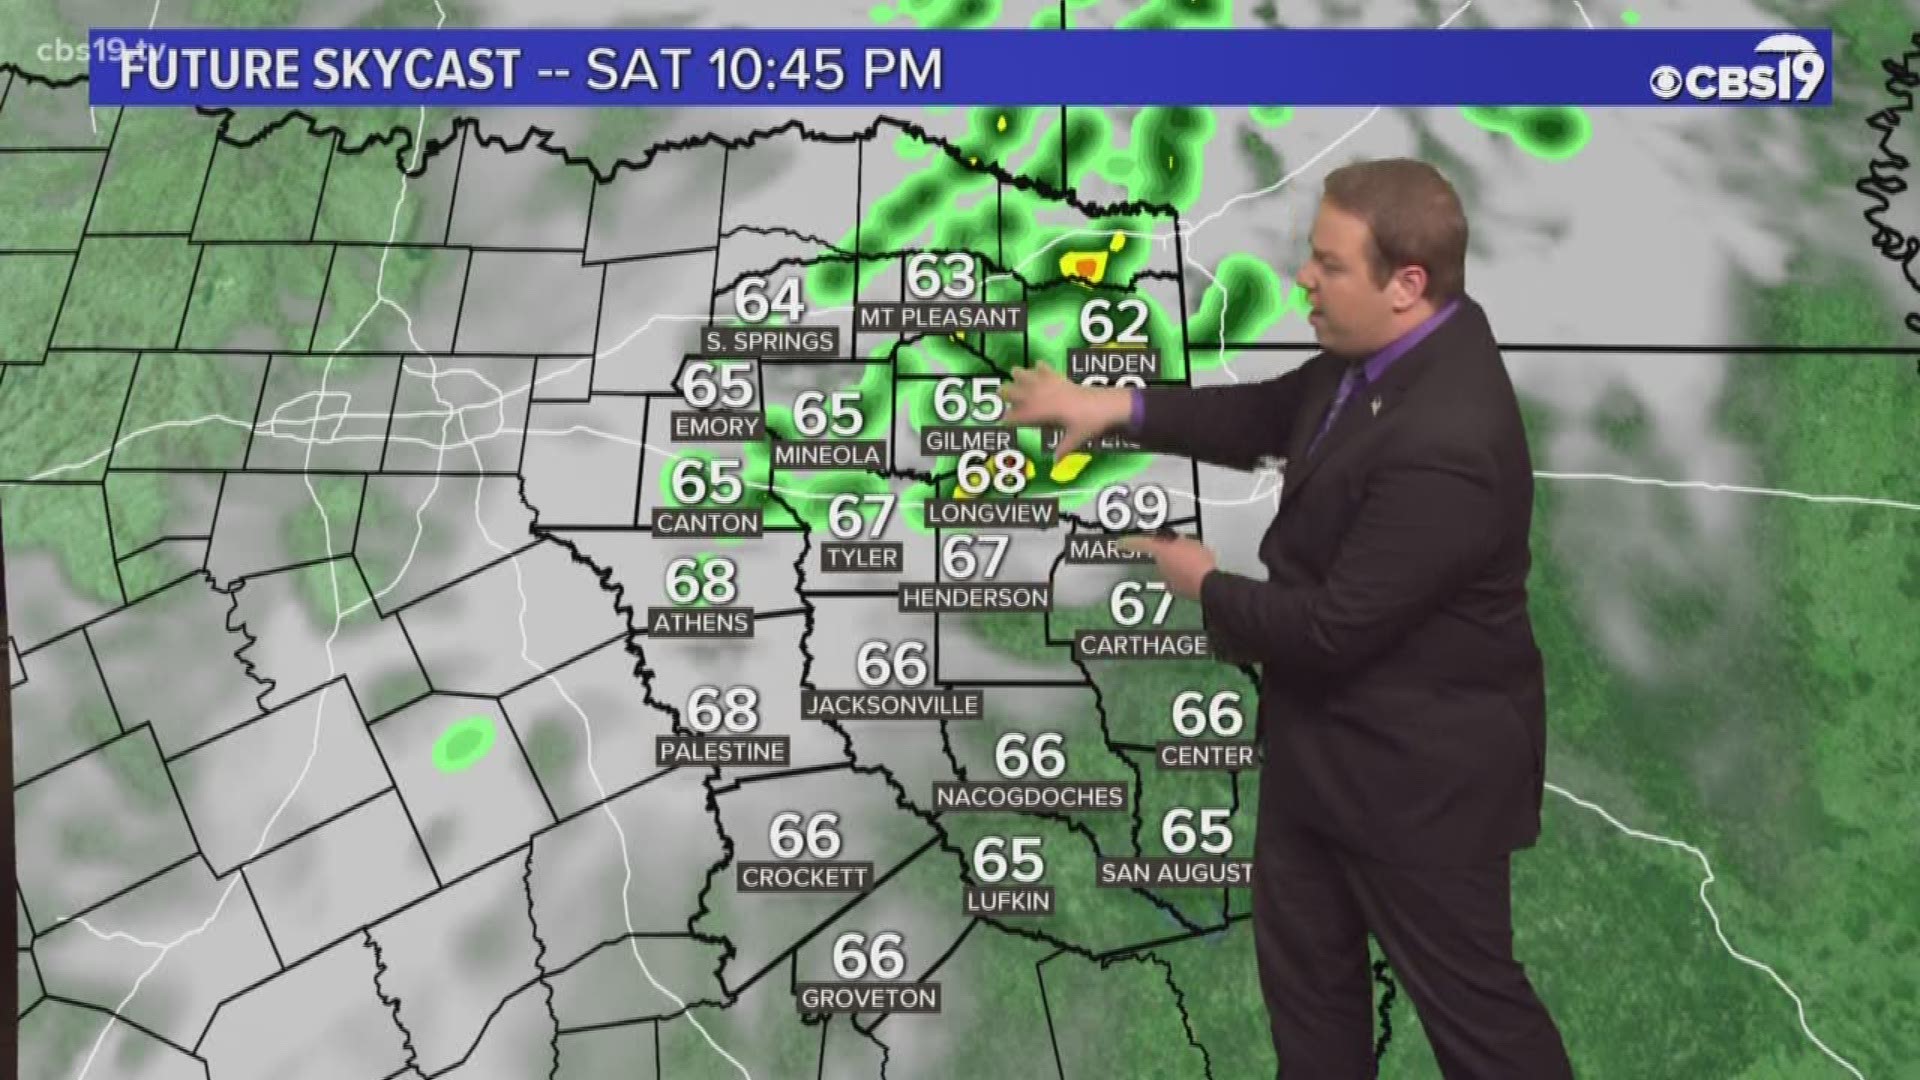 It's not going to be a washout, but rain is a factor as we head into this weekend. Watch Meteorologist Michael Behrens' latest forecast for a full breakdown.